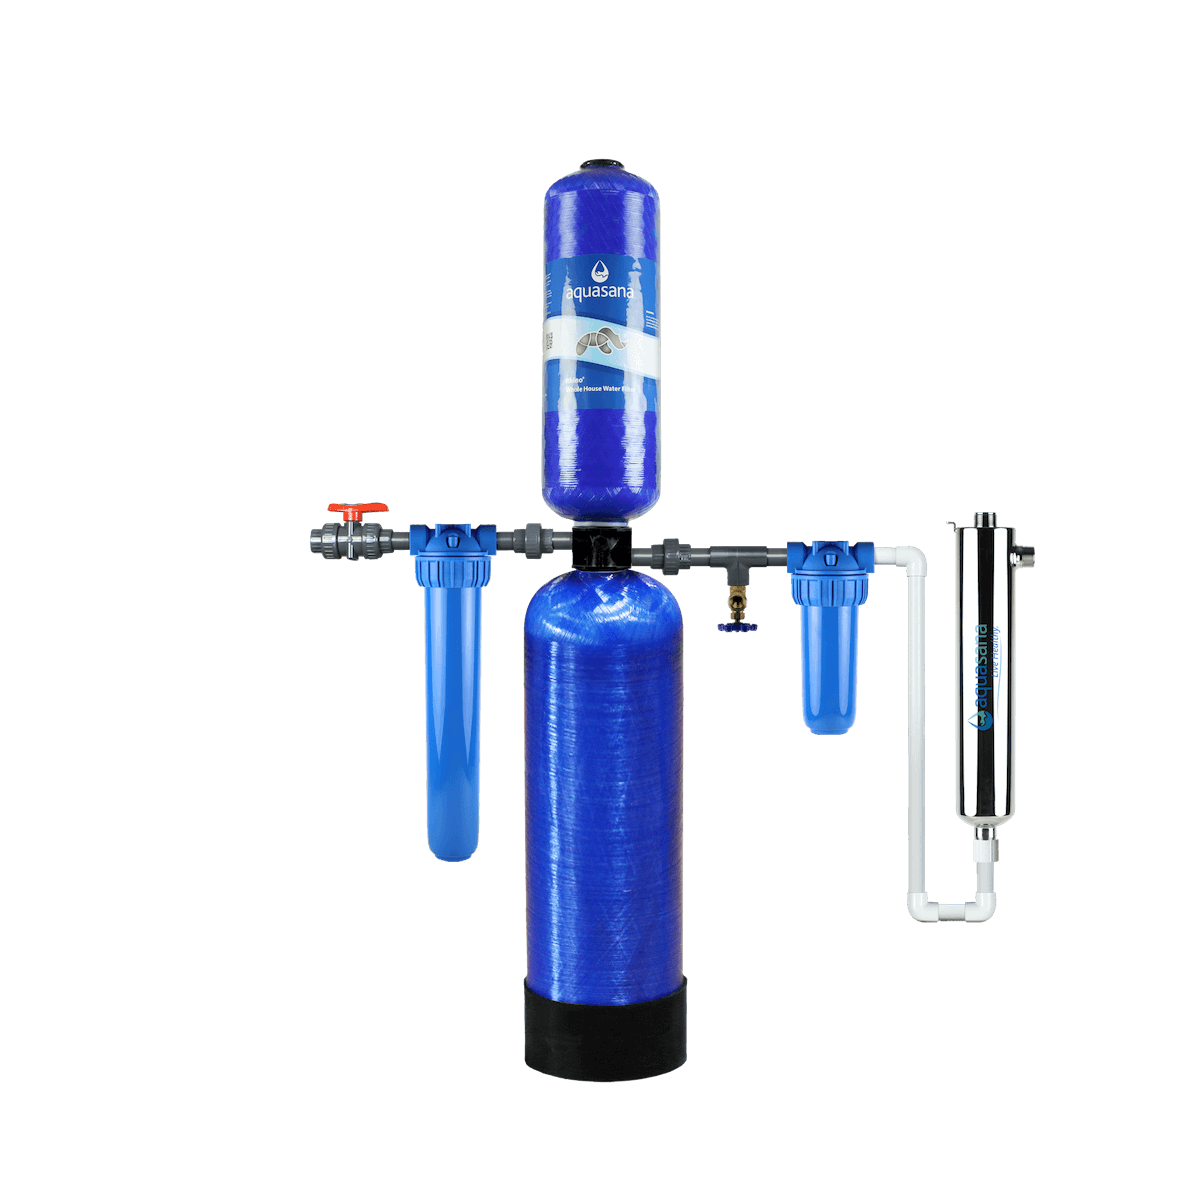 Rhino® Chloramines Max Flow Whole House Water UV Filter System For Home Removes 99% of Bacteria & Viruses Aquasana